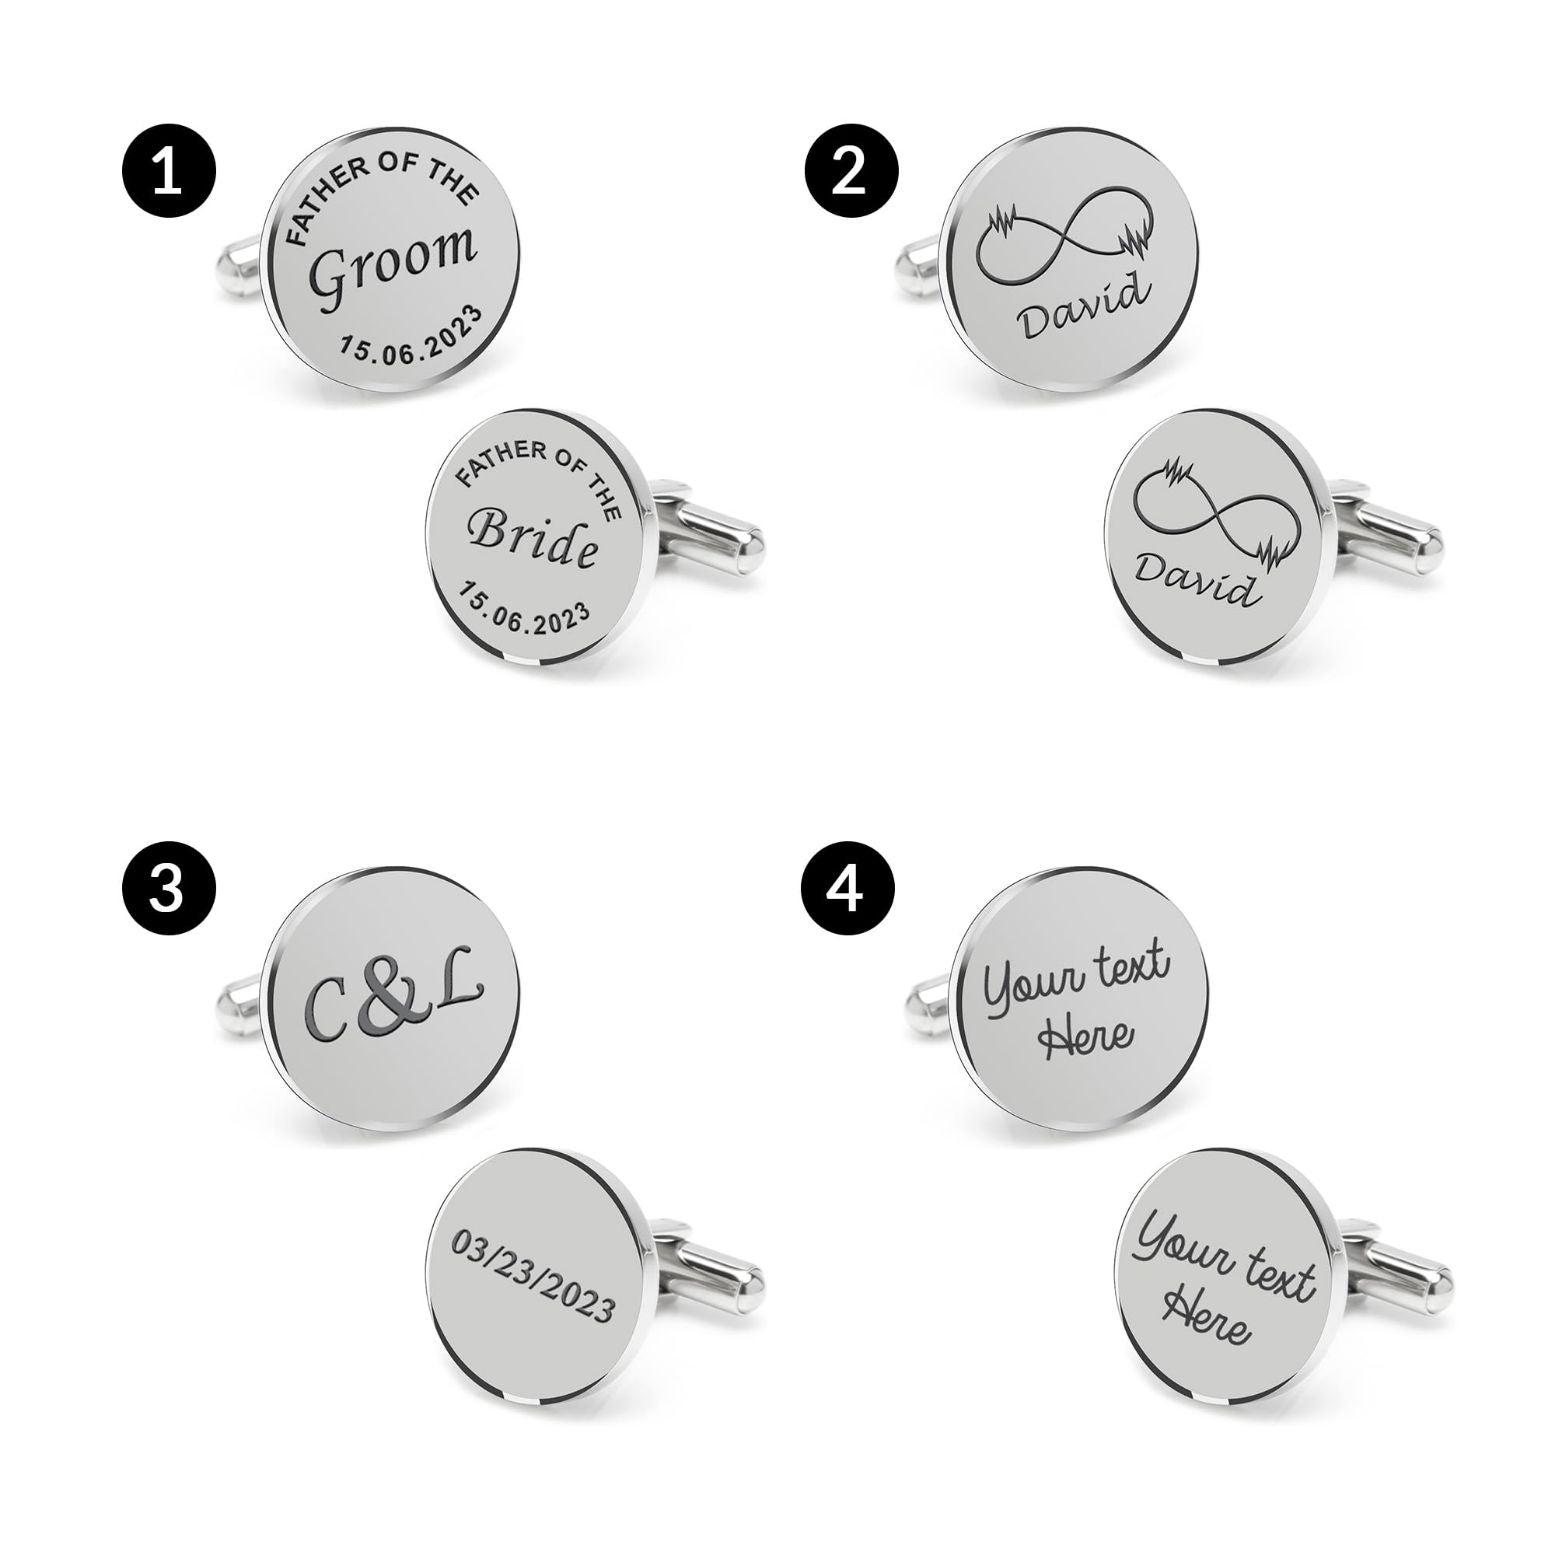 Personalised 925 Sterling Silver Your Own Handwriting Text Cufflink for Men and Boys 1 Pair